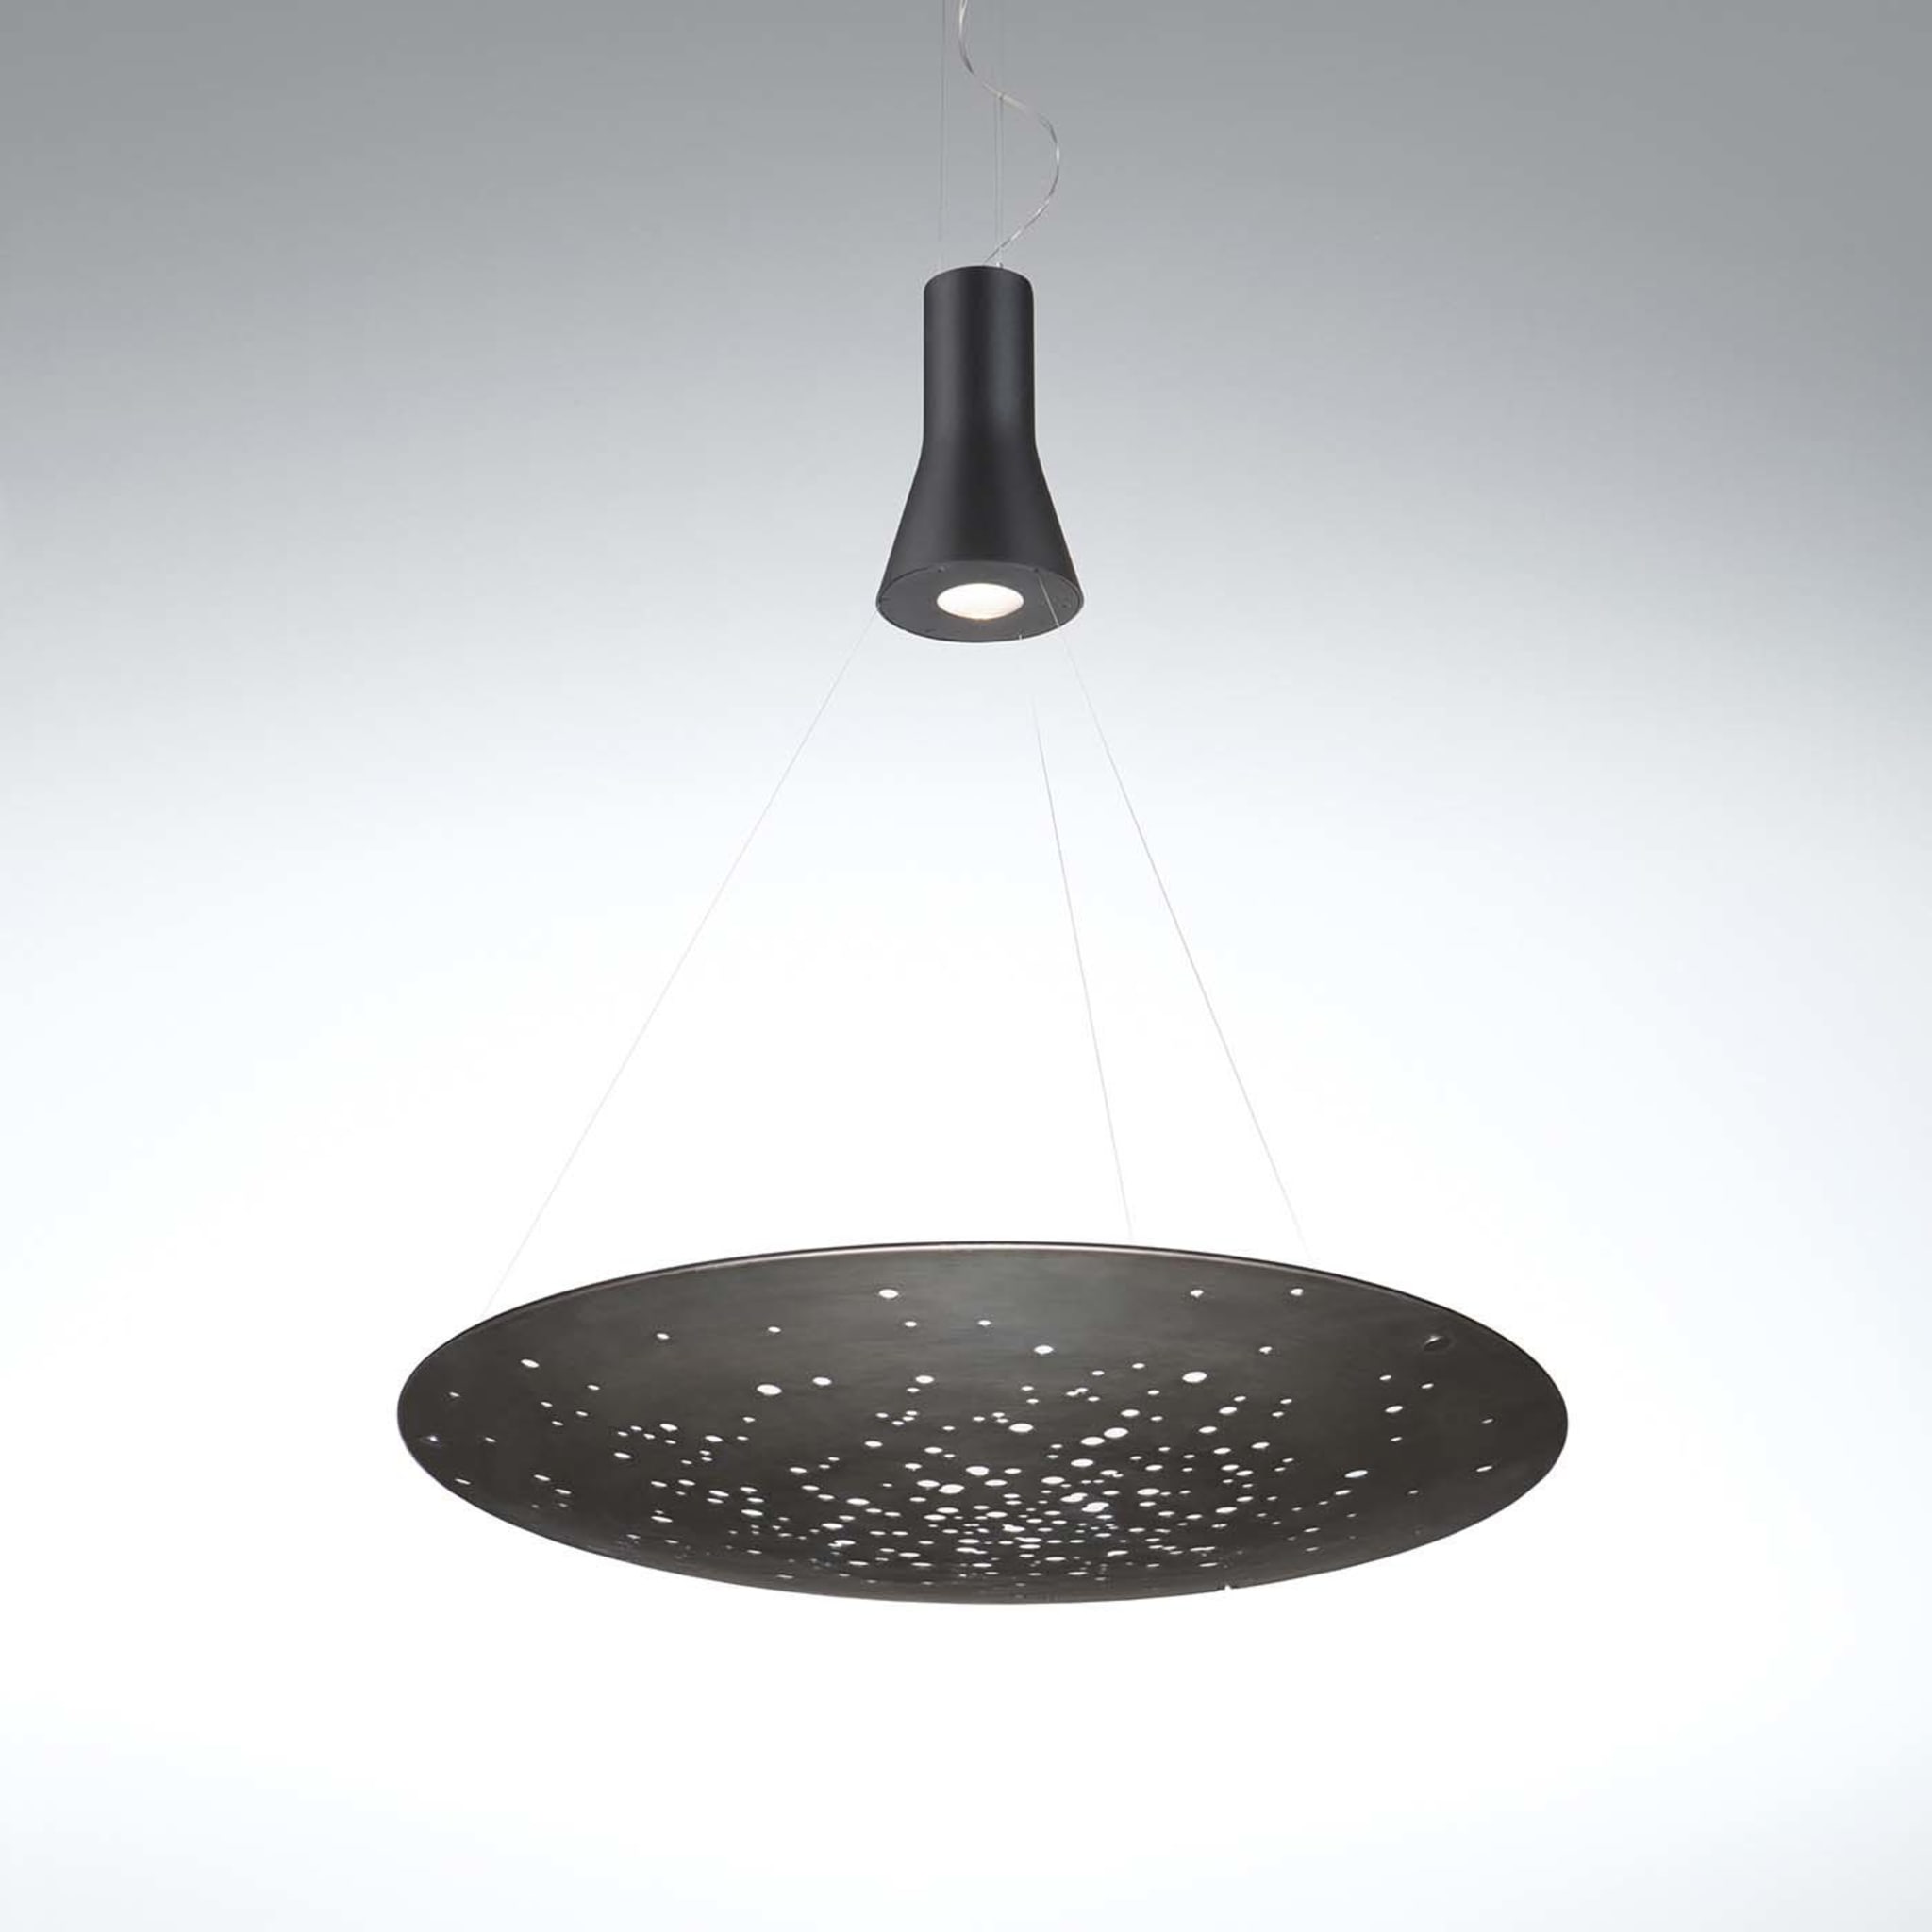 Lens Burnished Pendant Lamp by Lucie Koldova - Alternative view 1